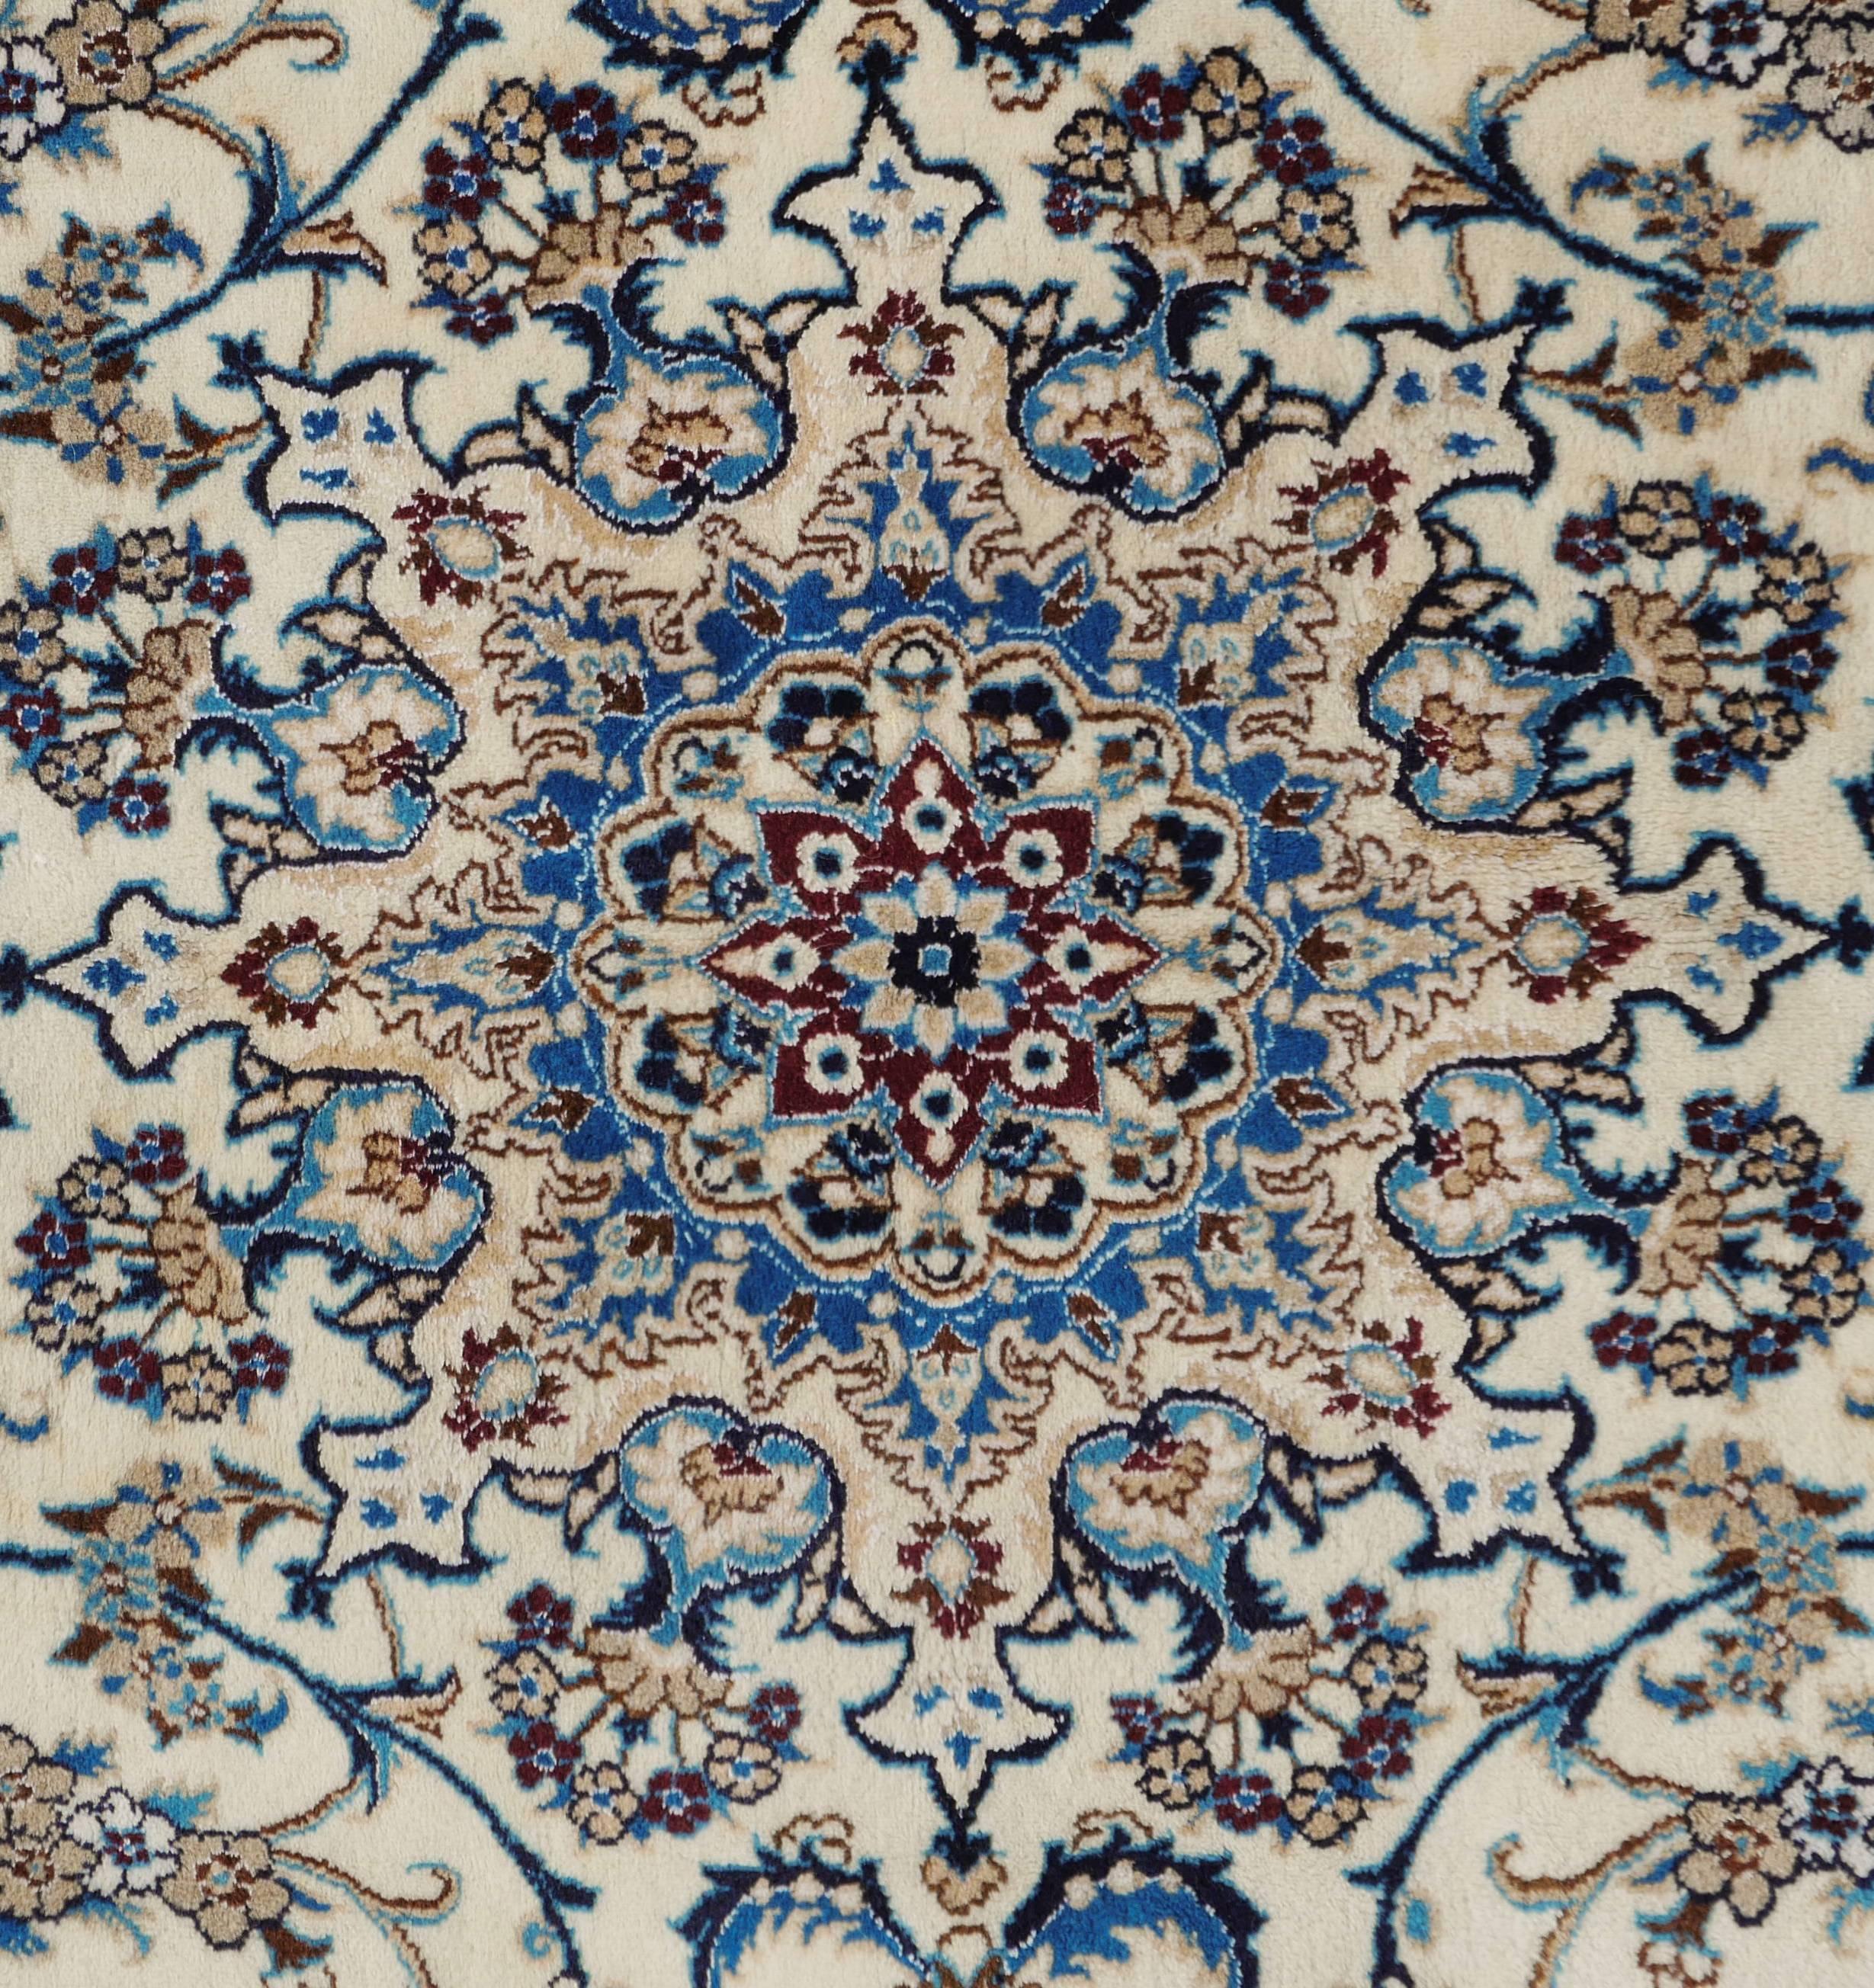 Persian Nain 290 x 190cm c. 9.5 by 6.2 feet In Excellent Condition For Sale In Edinburgh, GB